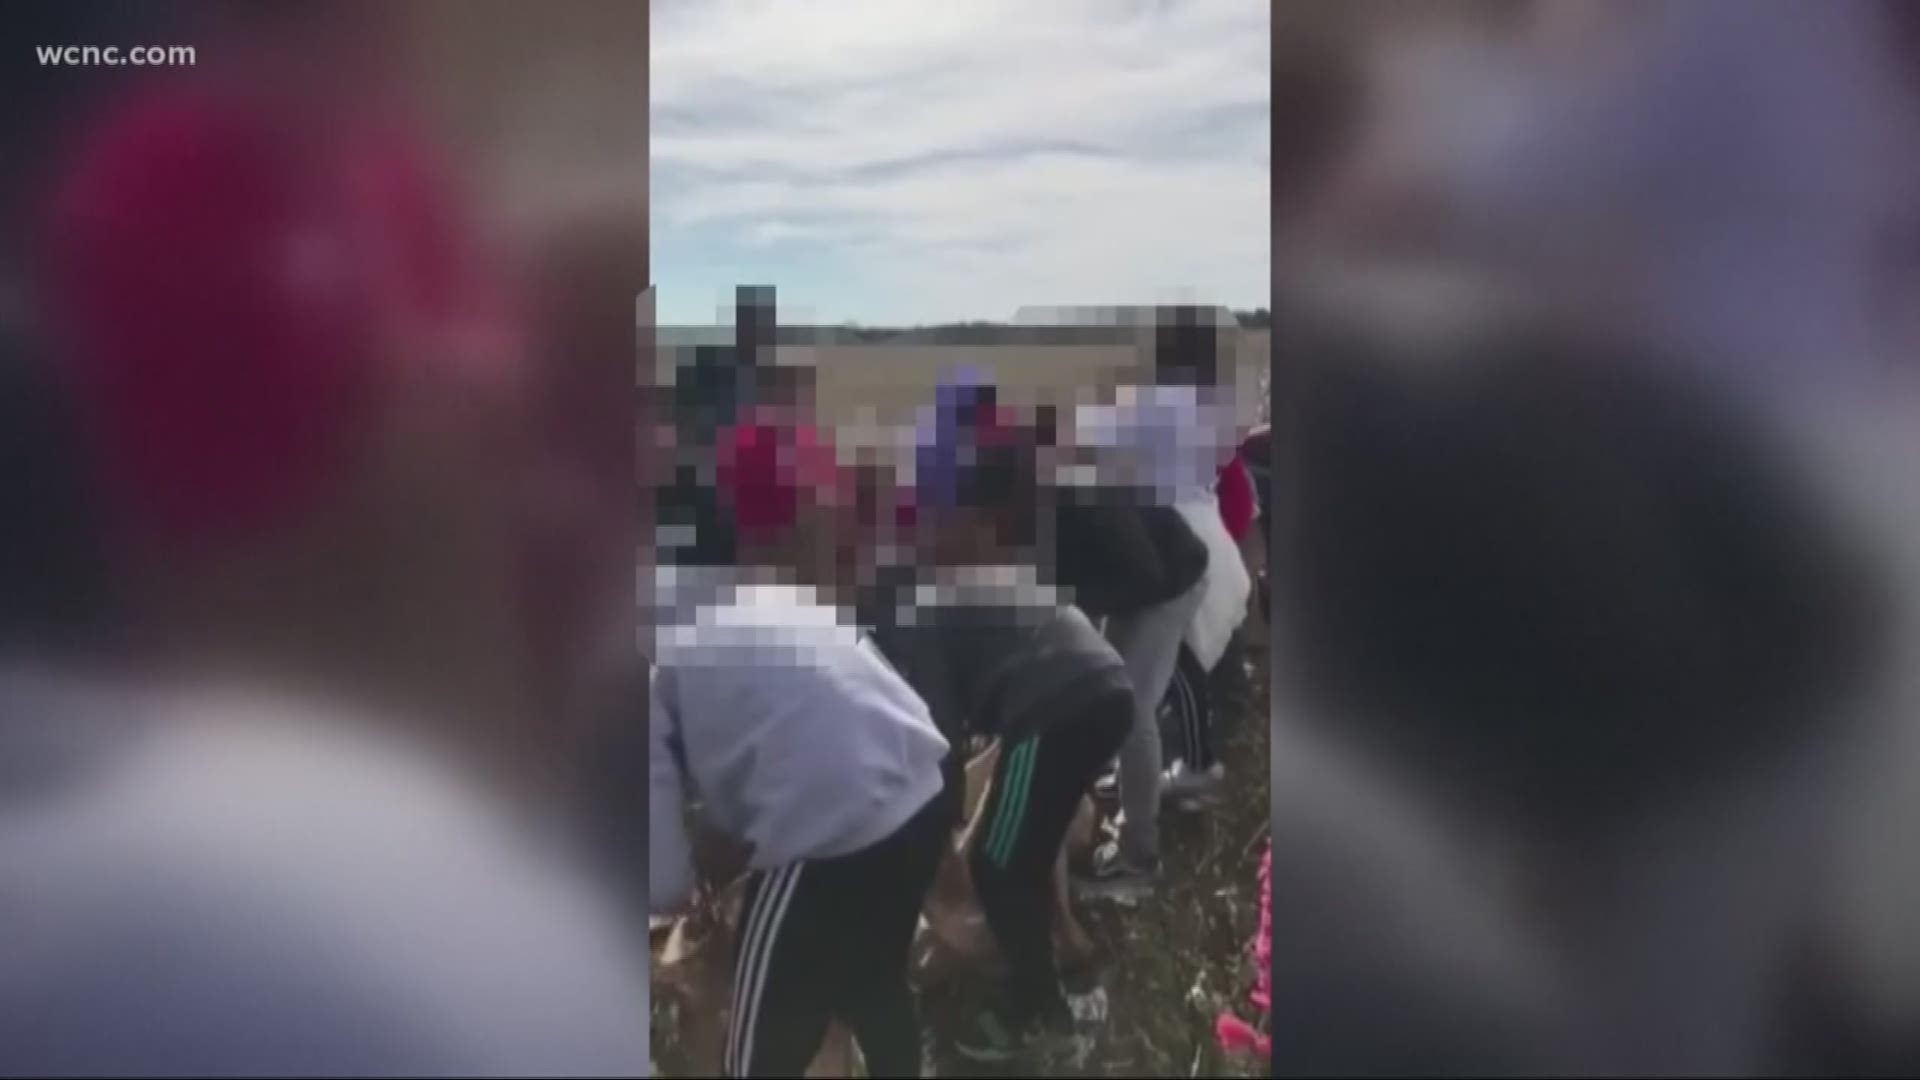 Civil rights groups and school leaders responding after video surfaced of a group of Rock Hill students picking cotton and singing.